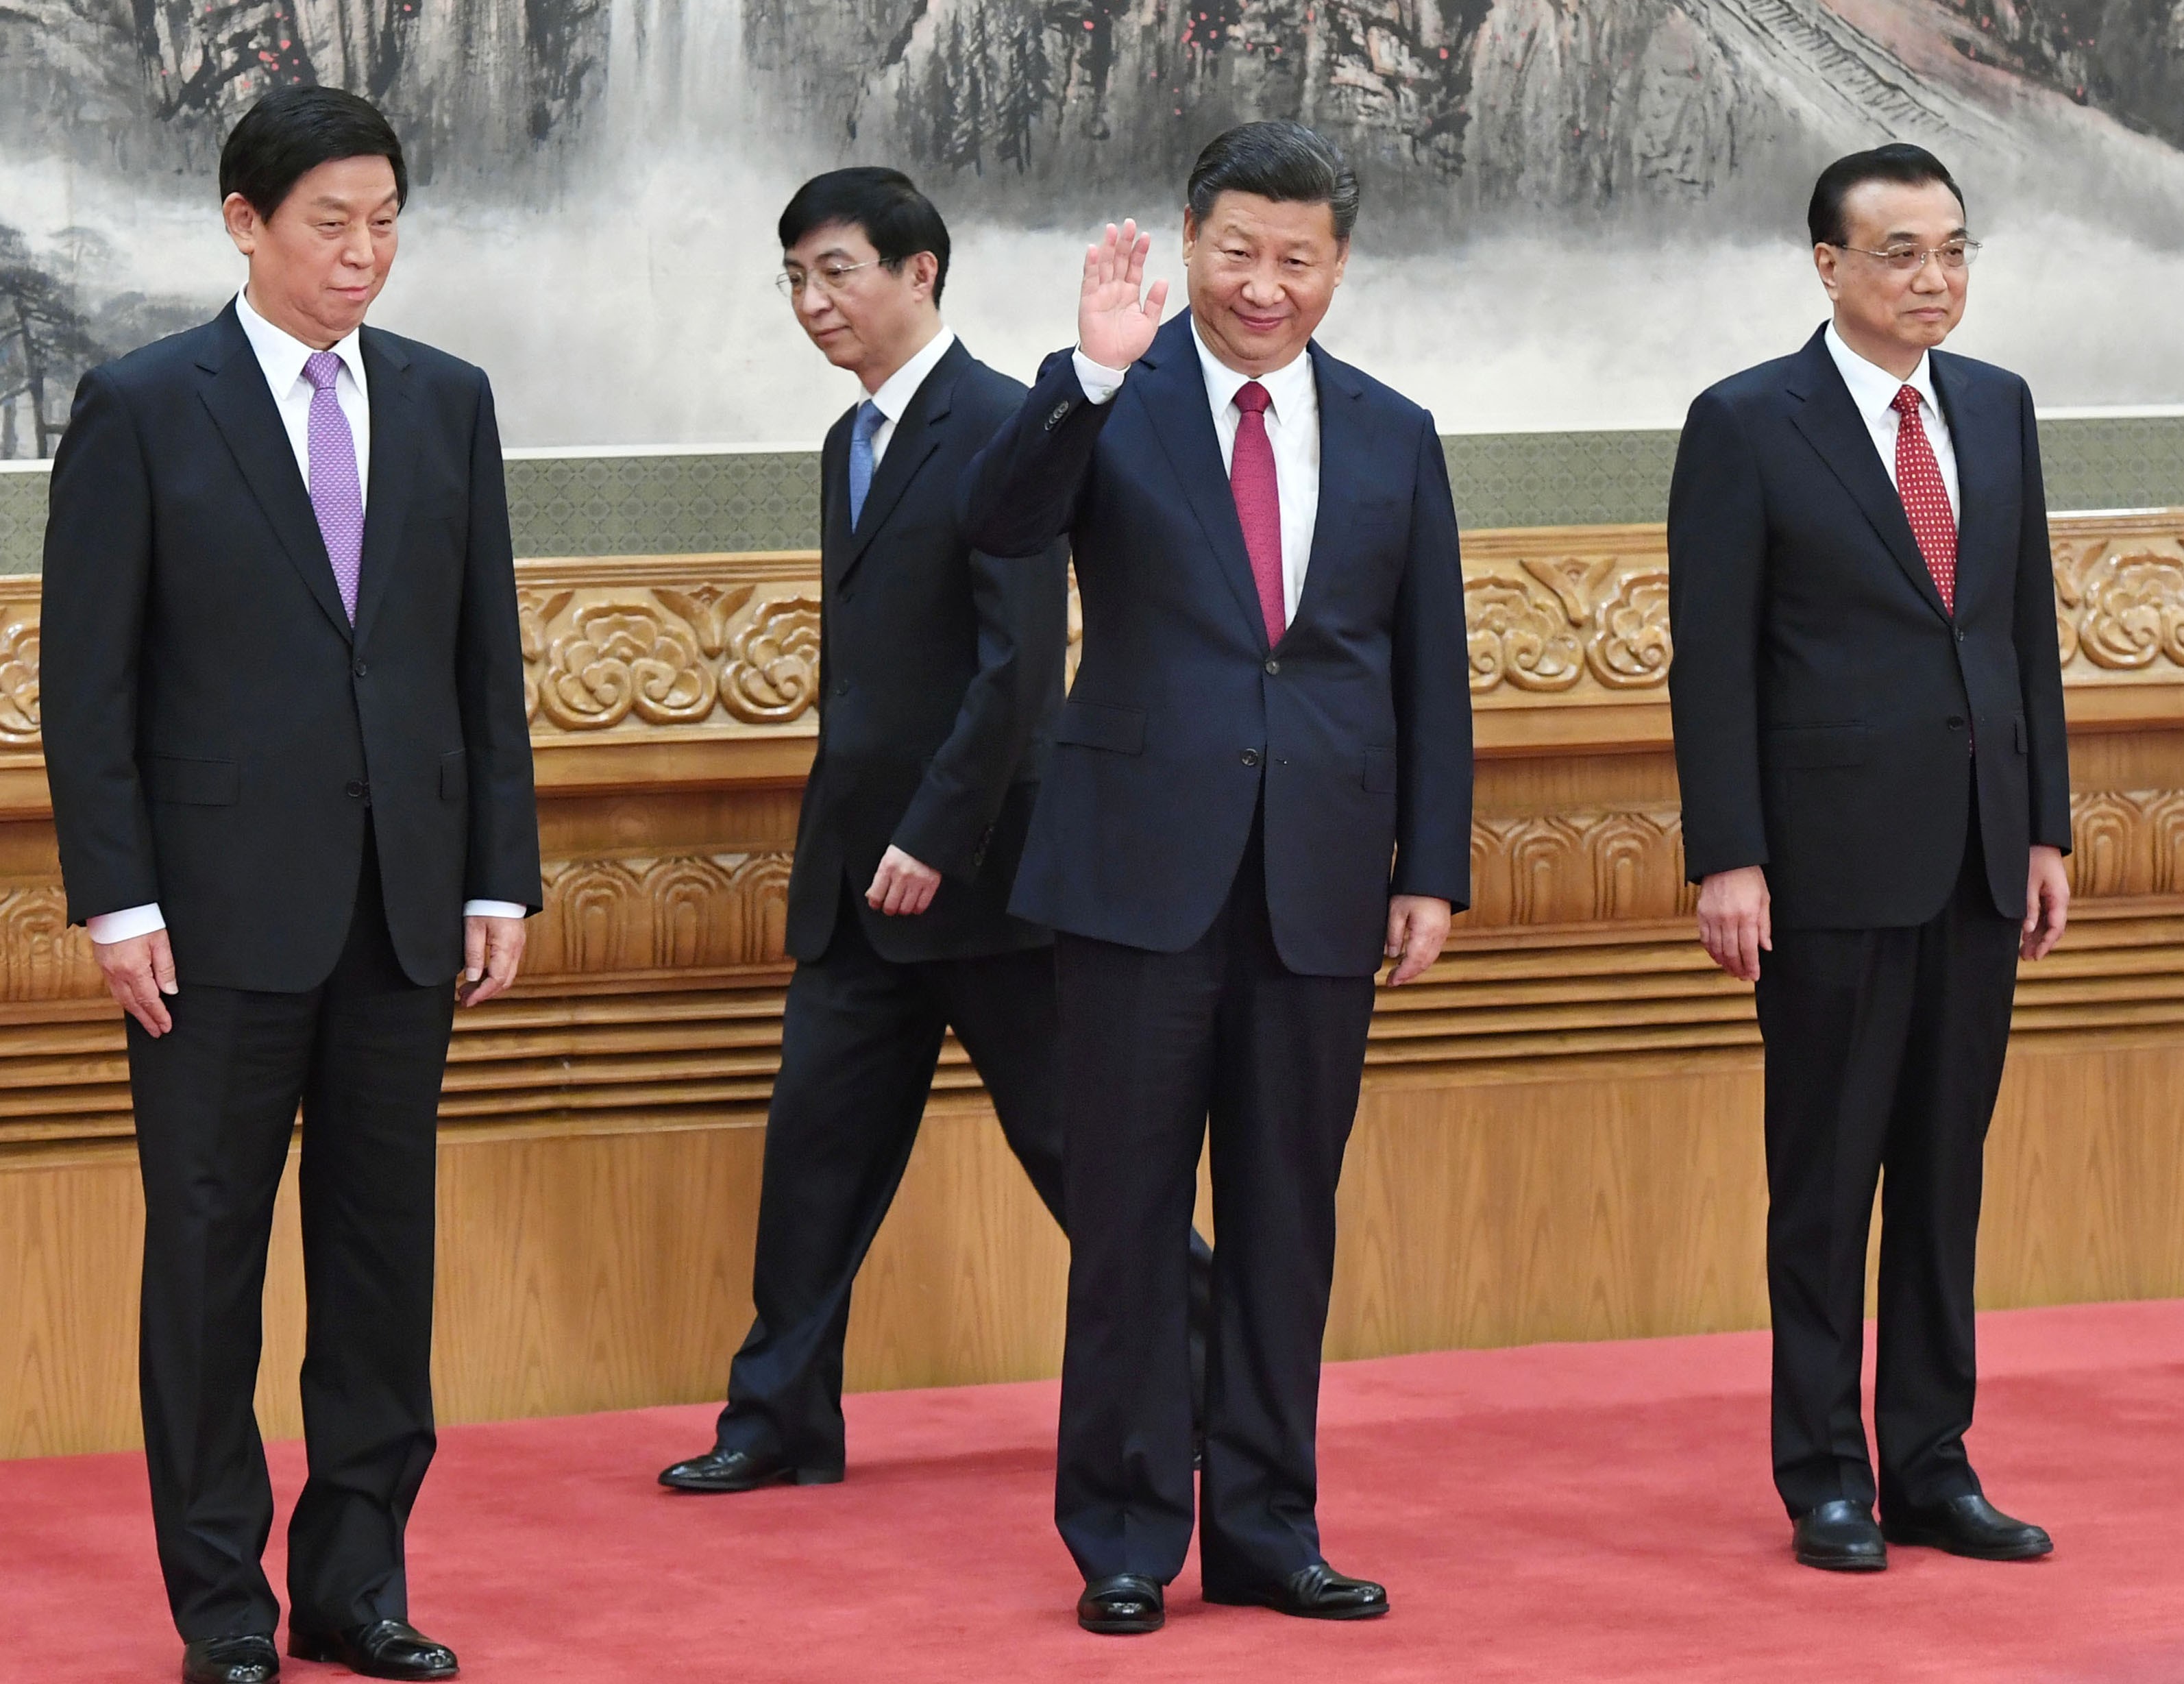 Chinese President Xi Jinping appears with his new leadership team at the Great Hall of the People in Beijing last month. China’s Politburo is now dominated by Xi loyalists. Photo: Kyodo